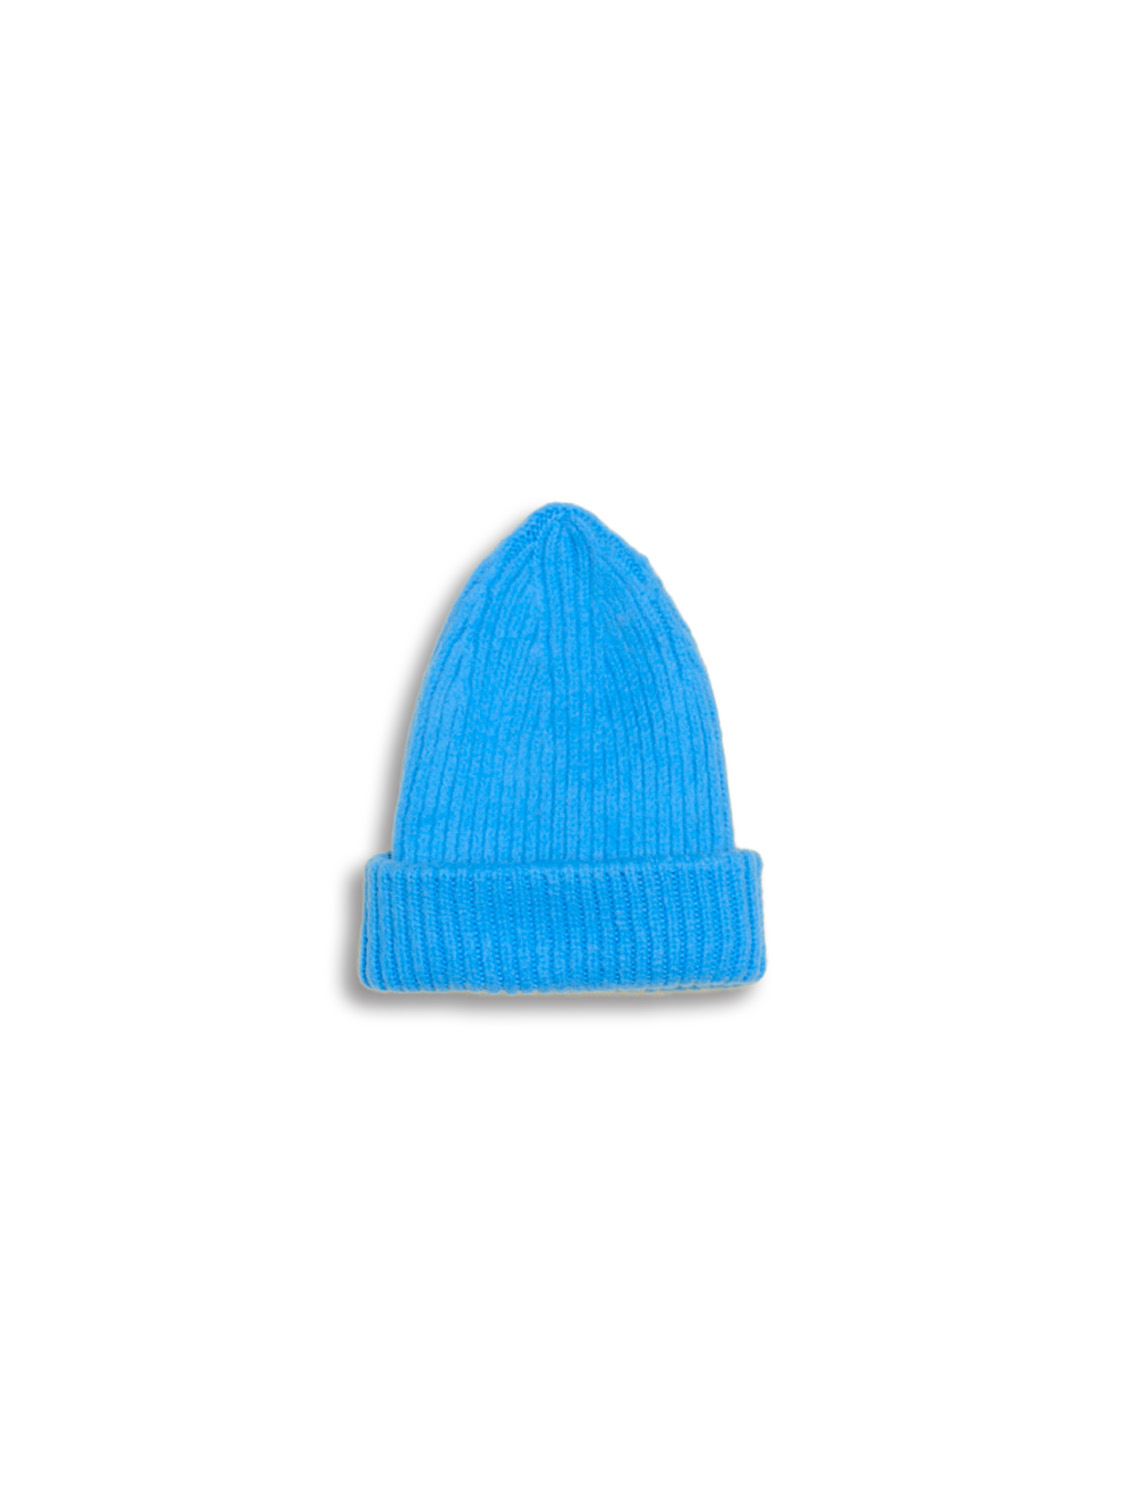 Unisex knitted hat - cashmere wool knitted hat